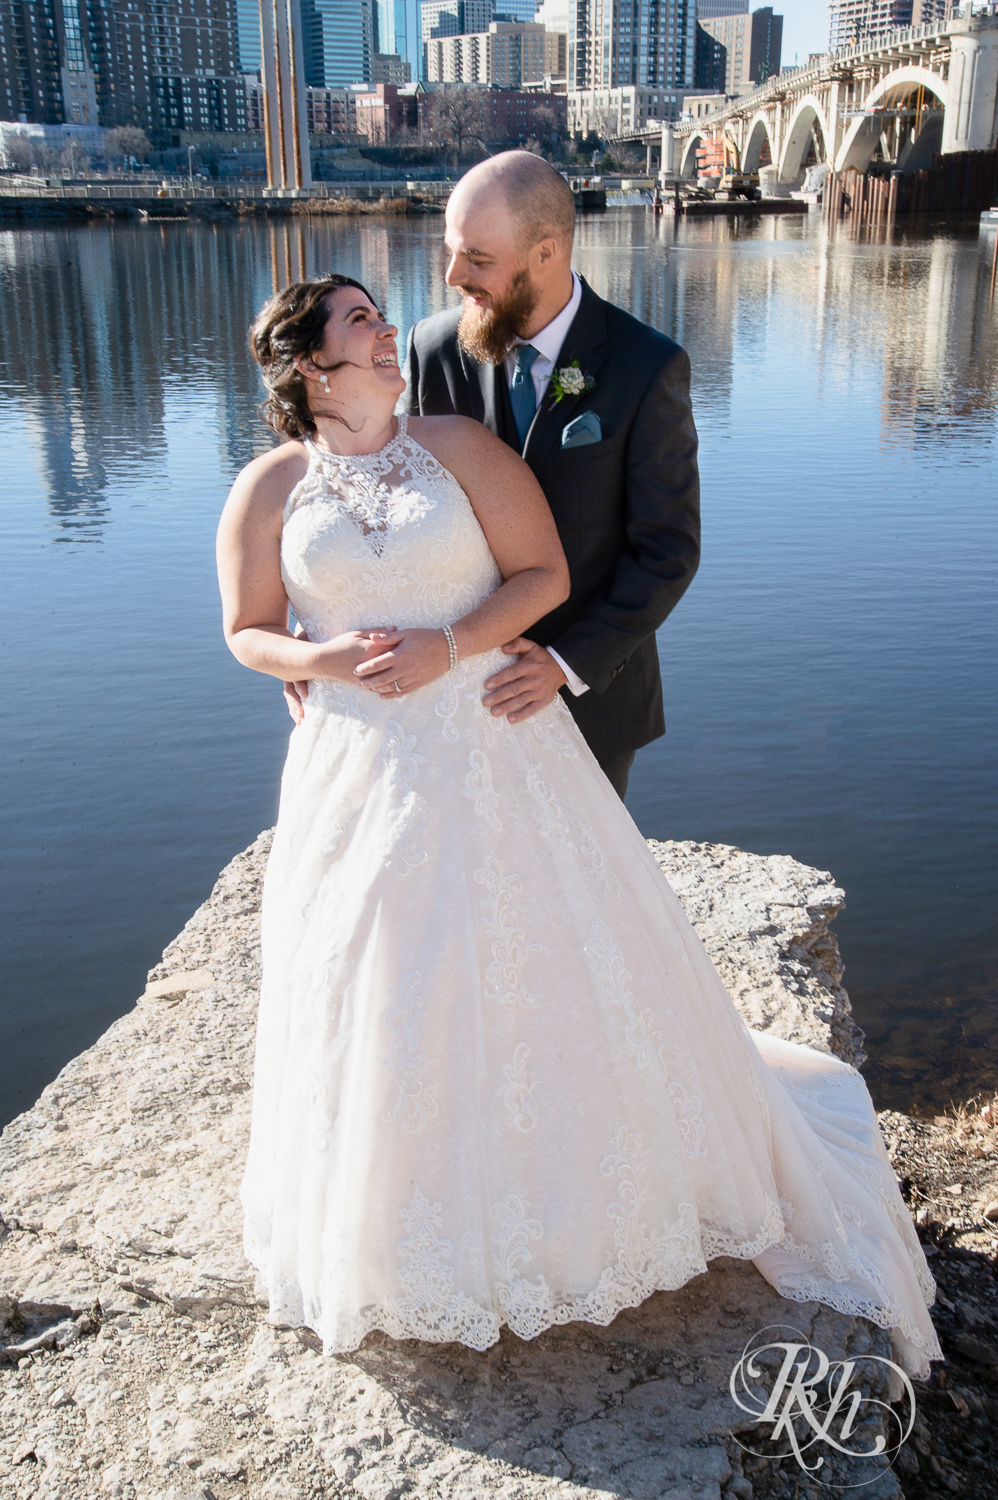 Bride and groom smile in front of river in Saint Anthony Main in Minneapolis, Minnesota.